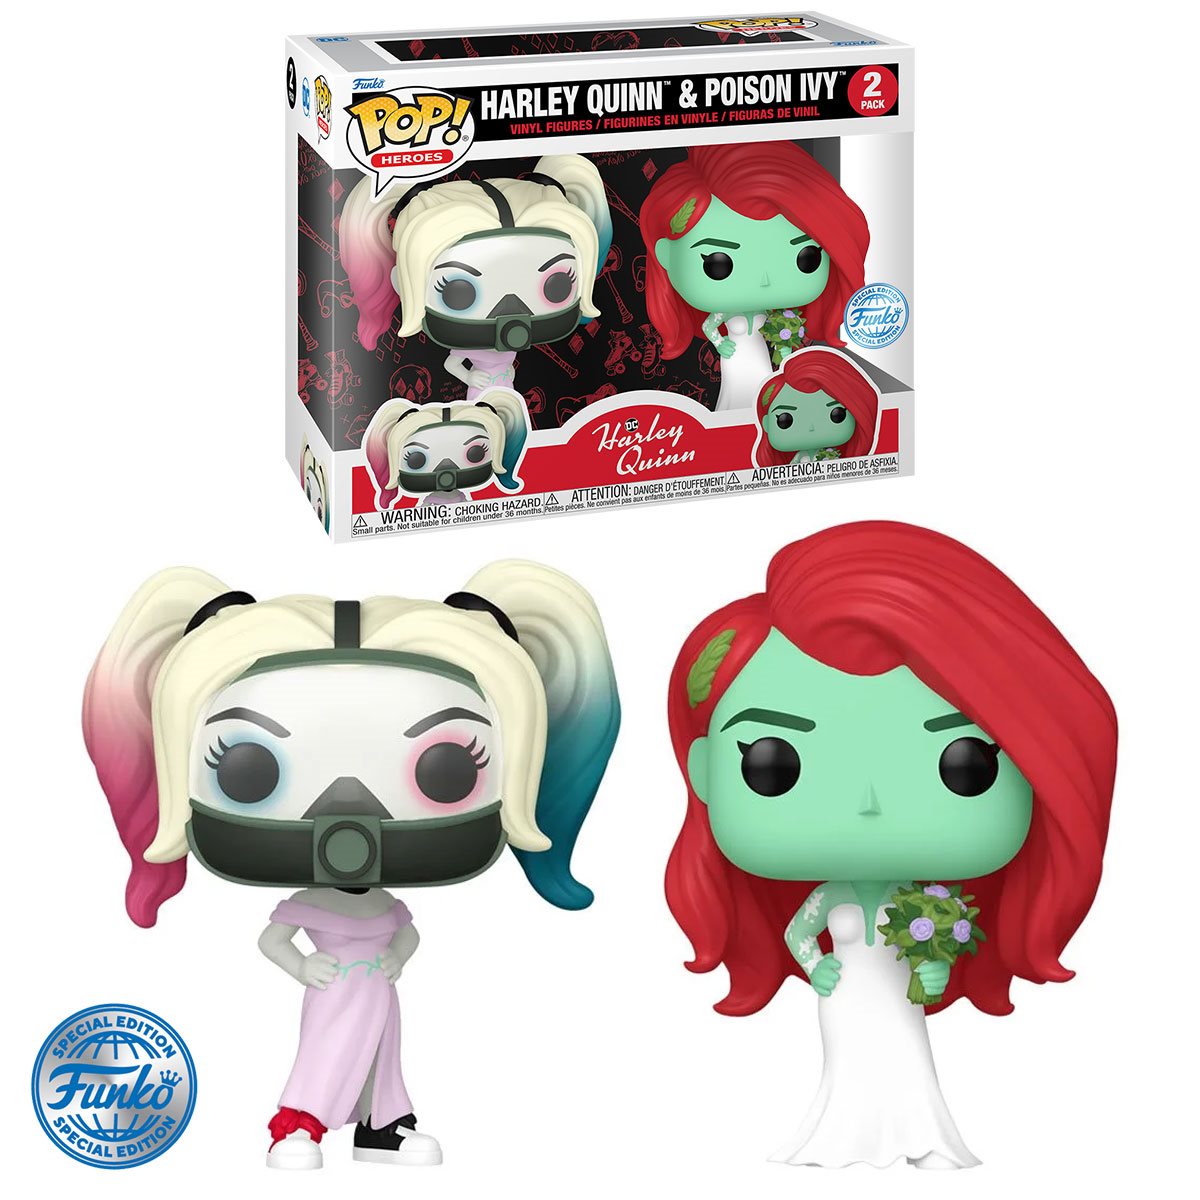 Funko POPS! With Purpose Pride Collection Harley Quinn 4-in Vinyl Figure